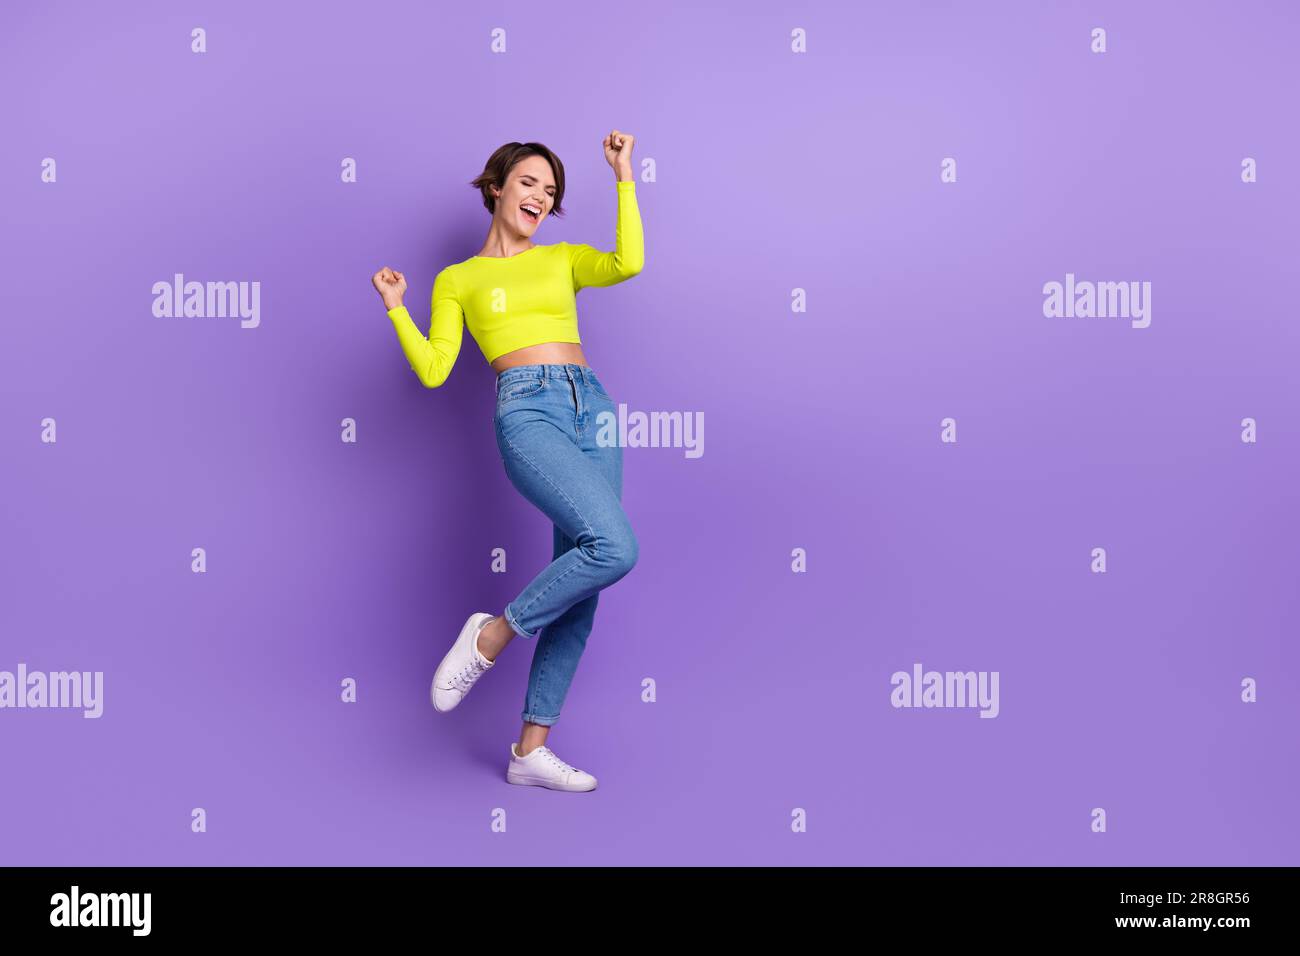 Full body photo of crazy young lady wearing levis jeans calvin klein crop top celebrating summer sale isolated on purple color background Stock Photo